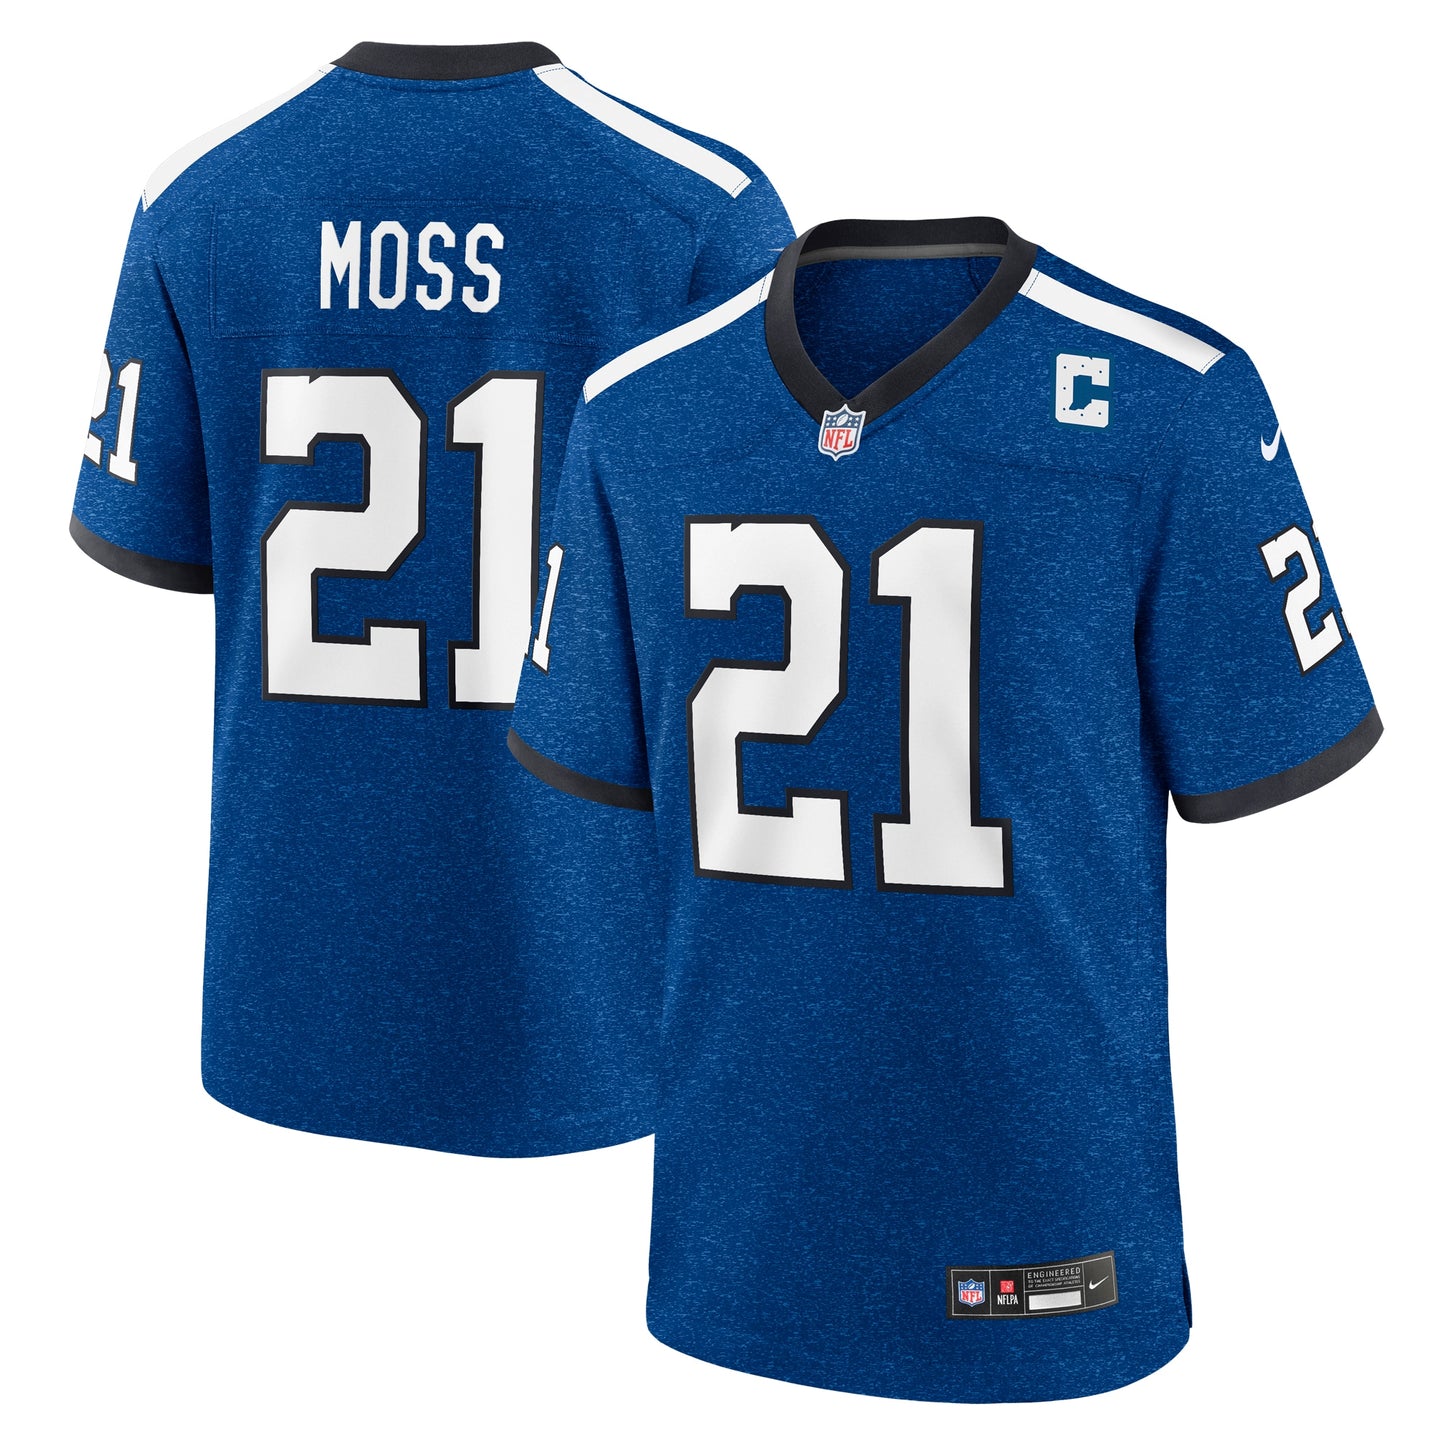 Zack Moss Indianapolis Colts Nike Indiana Nights Alternate Game Jersey - Royal